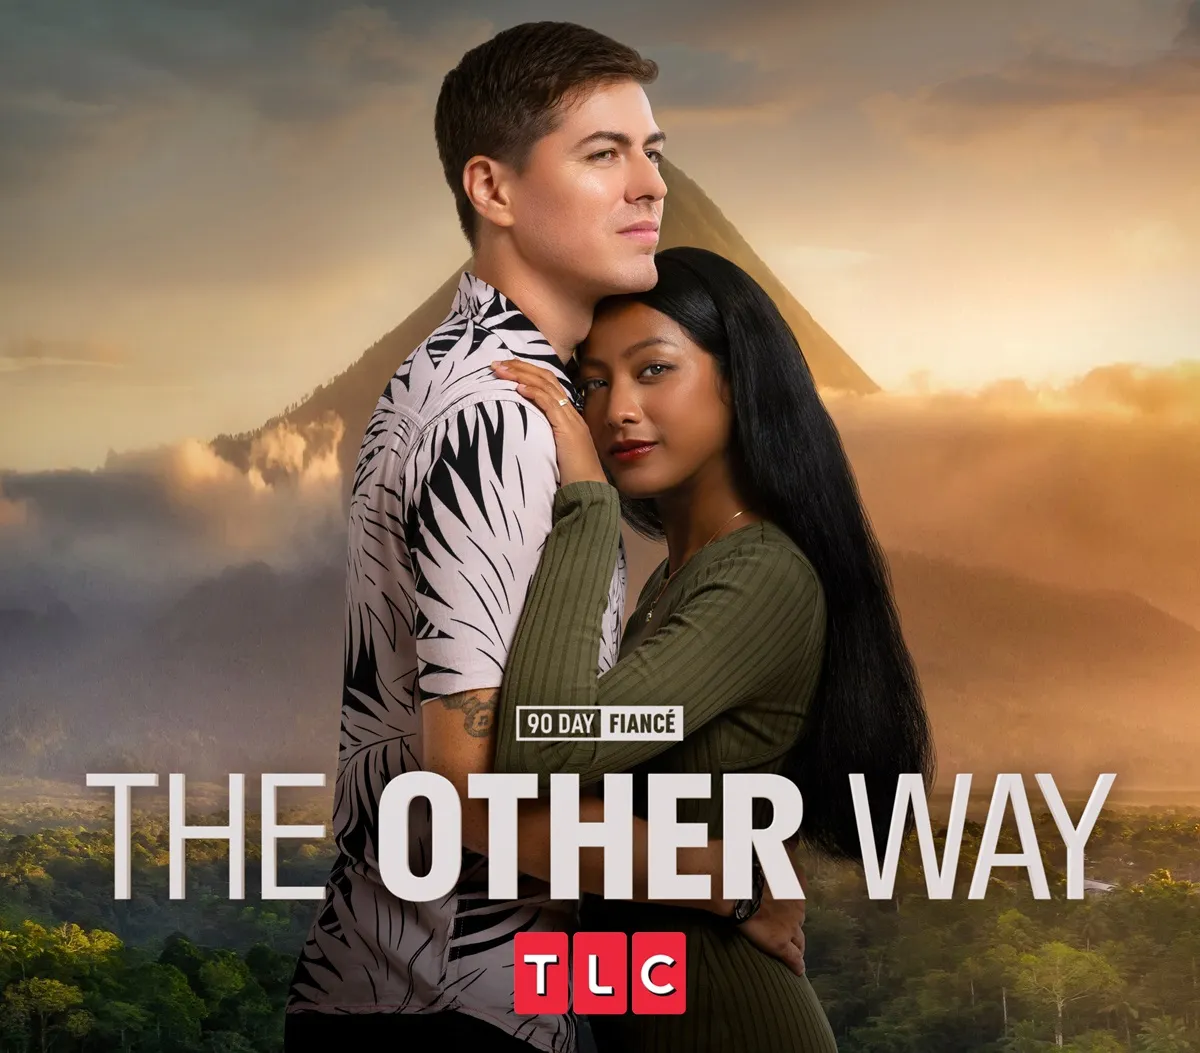 Key art for '90 Day Fiance: The Other Way' season 6 